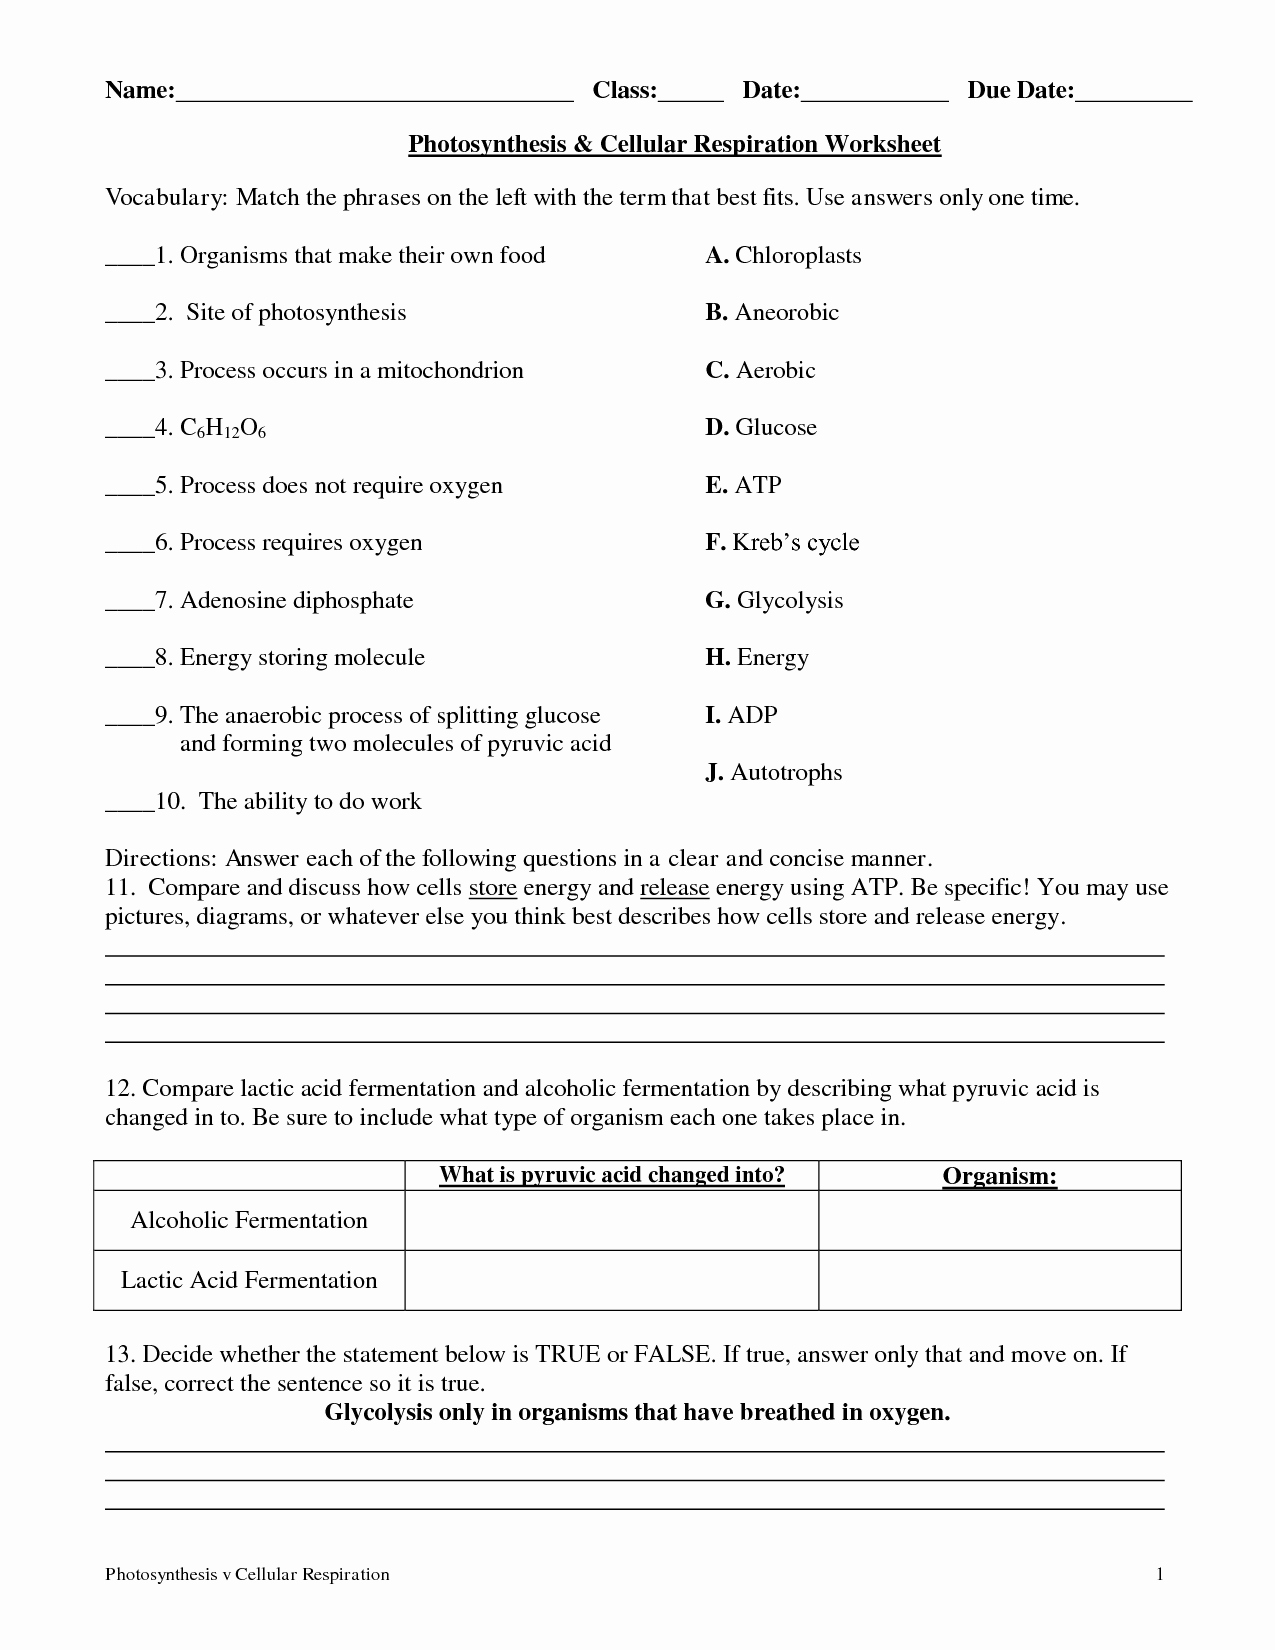 Photosynthesis and Cellular Respiration Worksheet Luxury Photosynthesis Worksheet Google Search